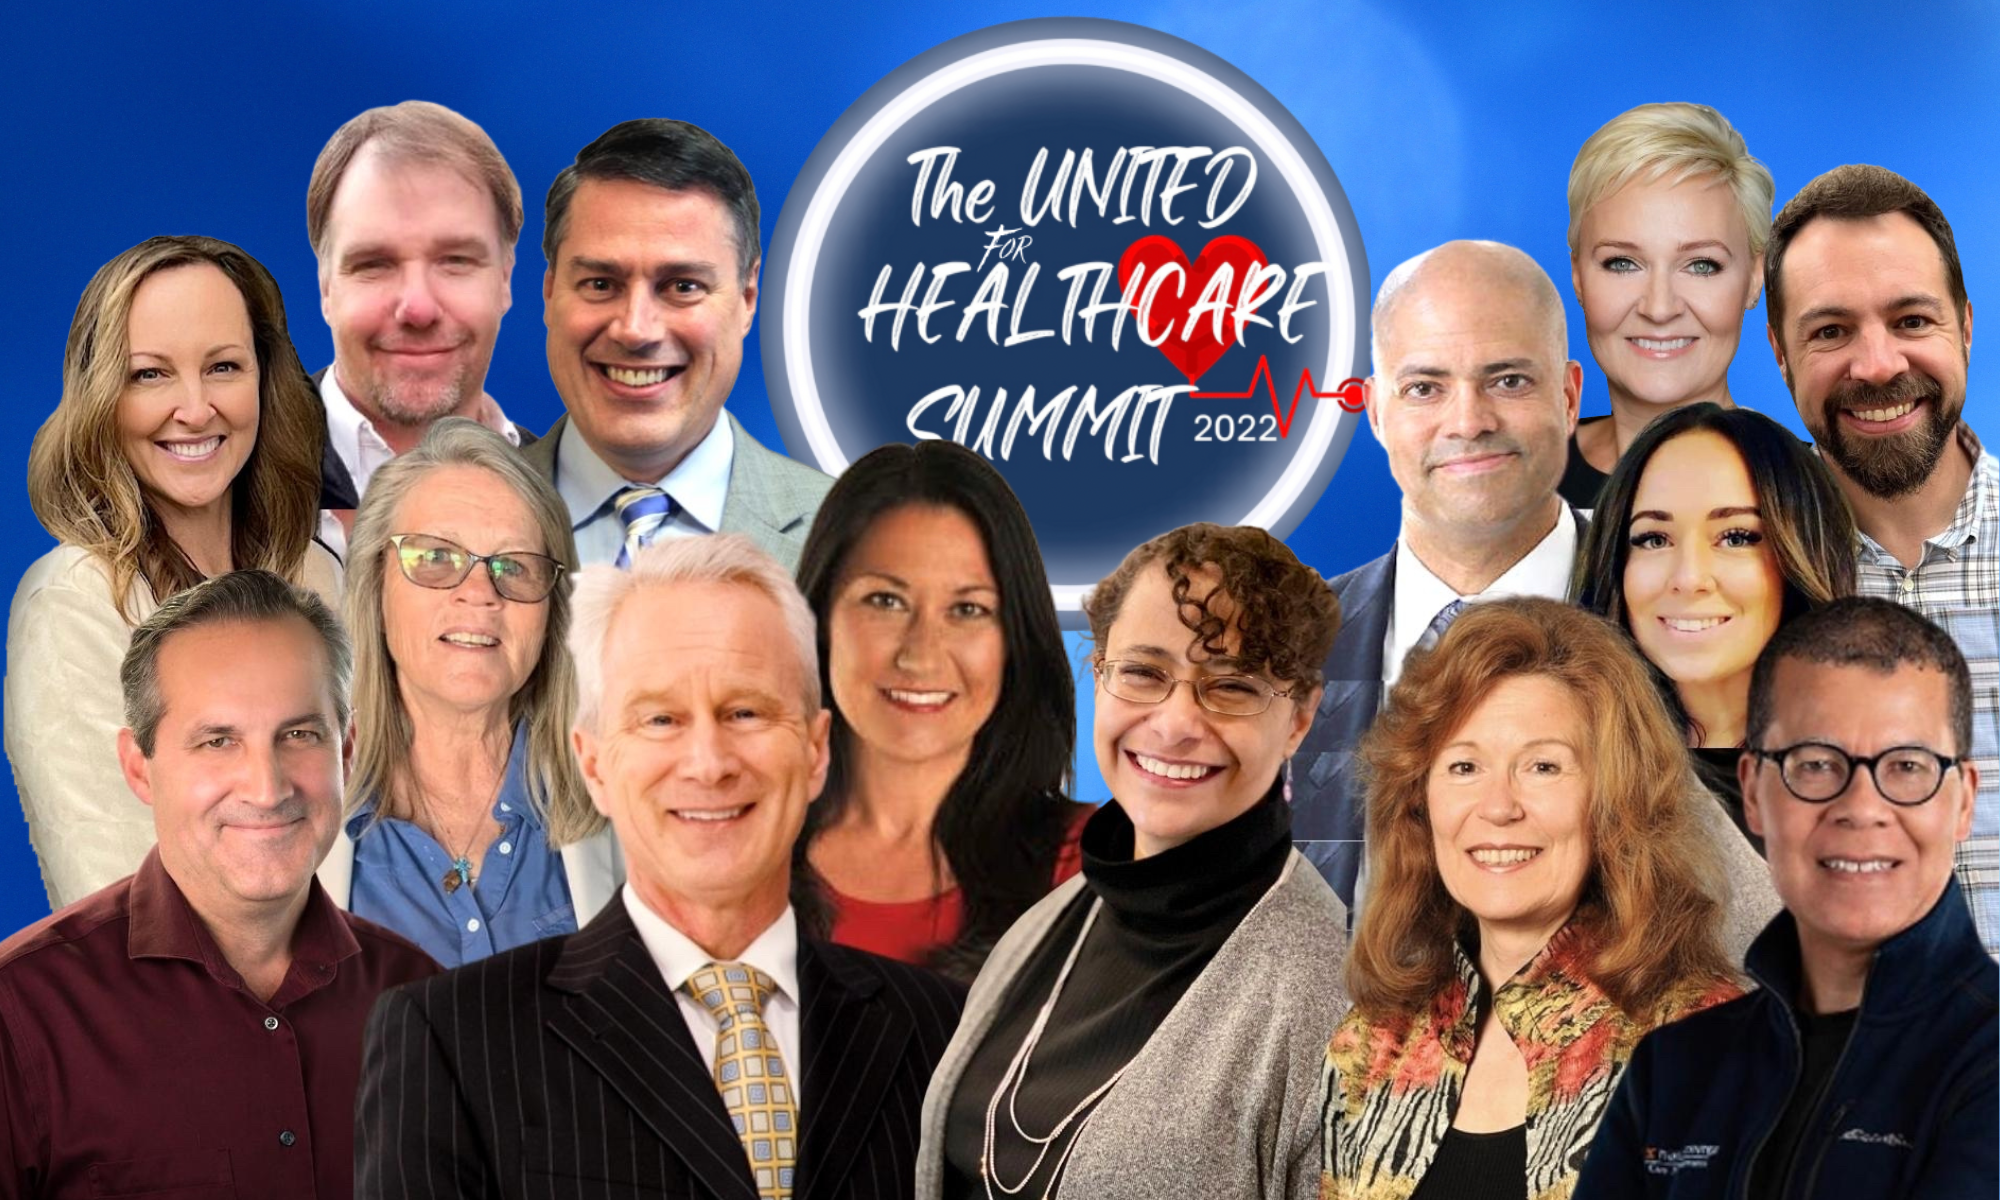 Watch The United For Healthcare Summit 2022